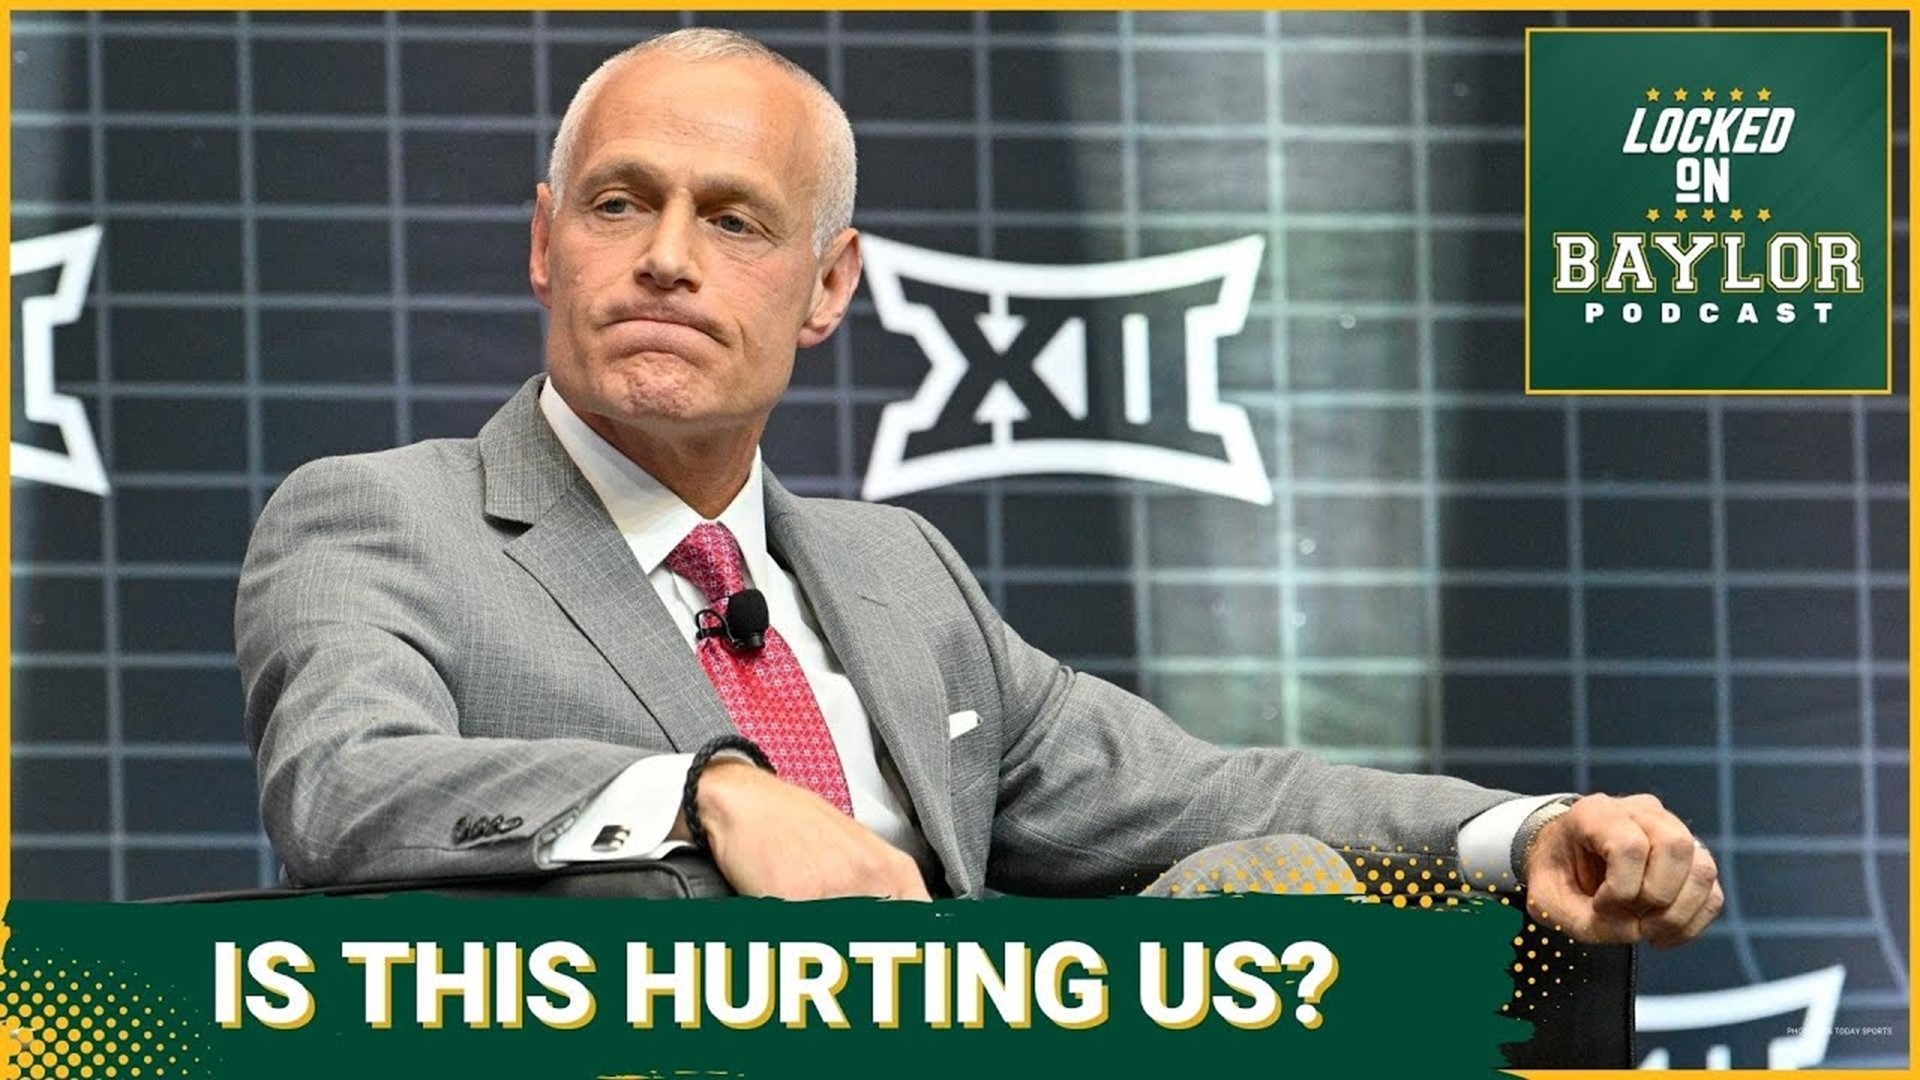 The College Football Playoff (CFP) initiated a process to expand the postseason to 12 teams for the 2024 and 2025 seasons, but will this hurt the Big 12?